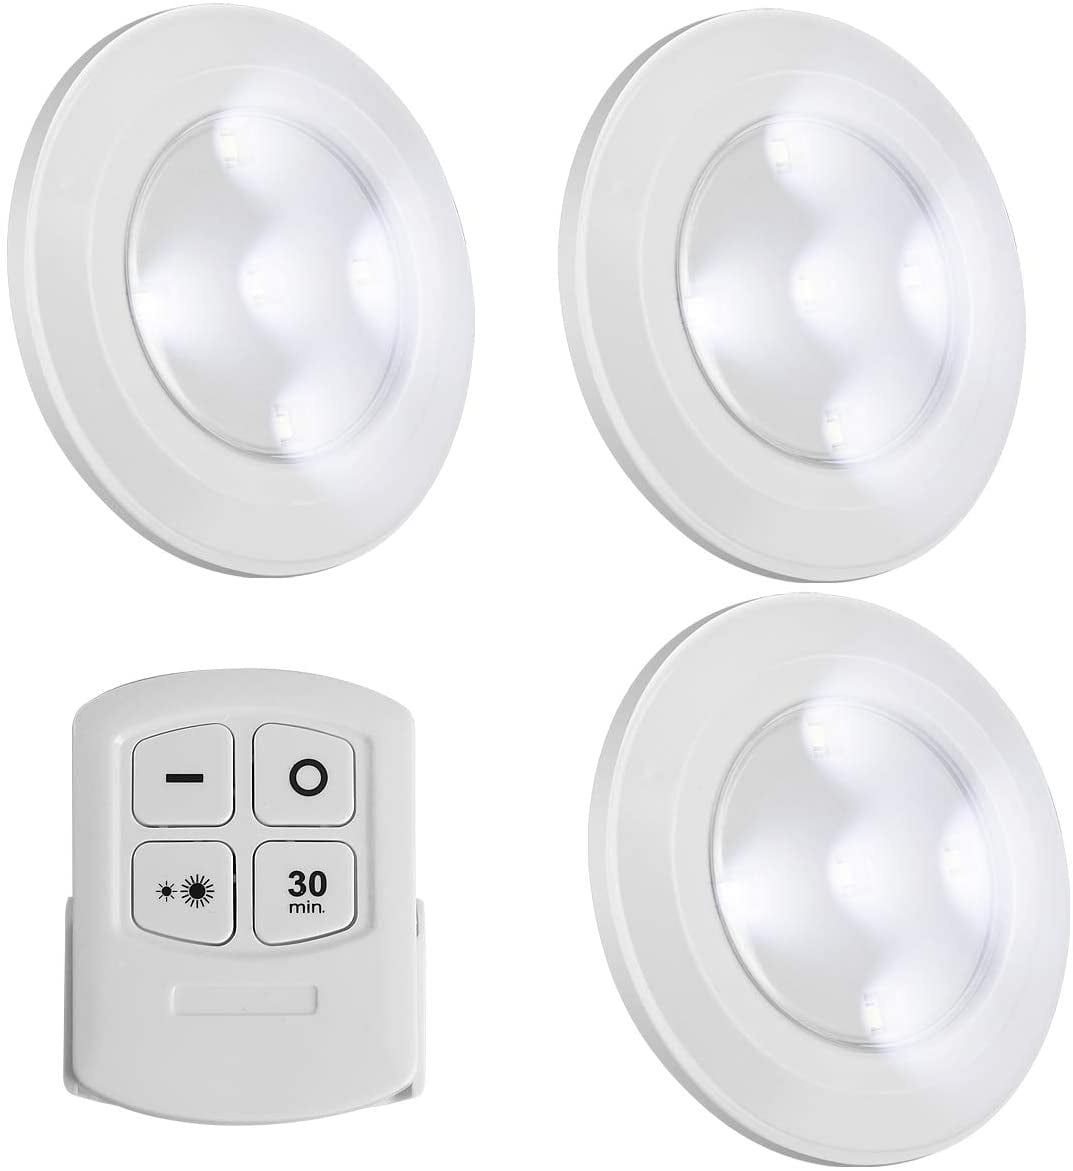 Wireless Dimmable Under Cabinet Lighting LED Puck Lights Lamps Battery Powered 